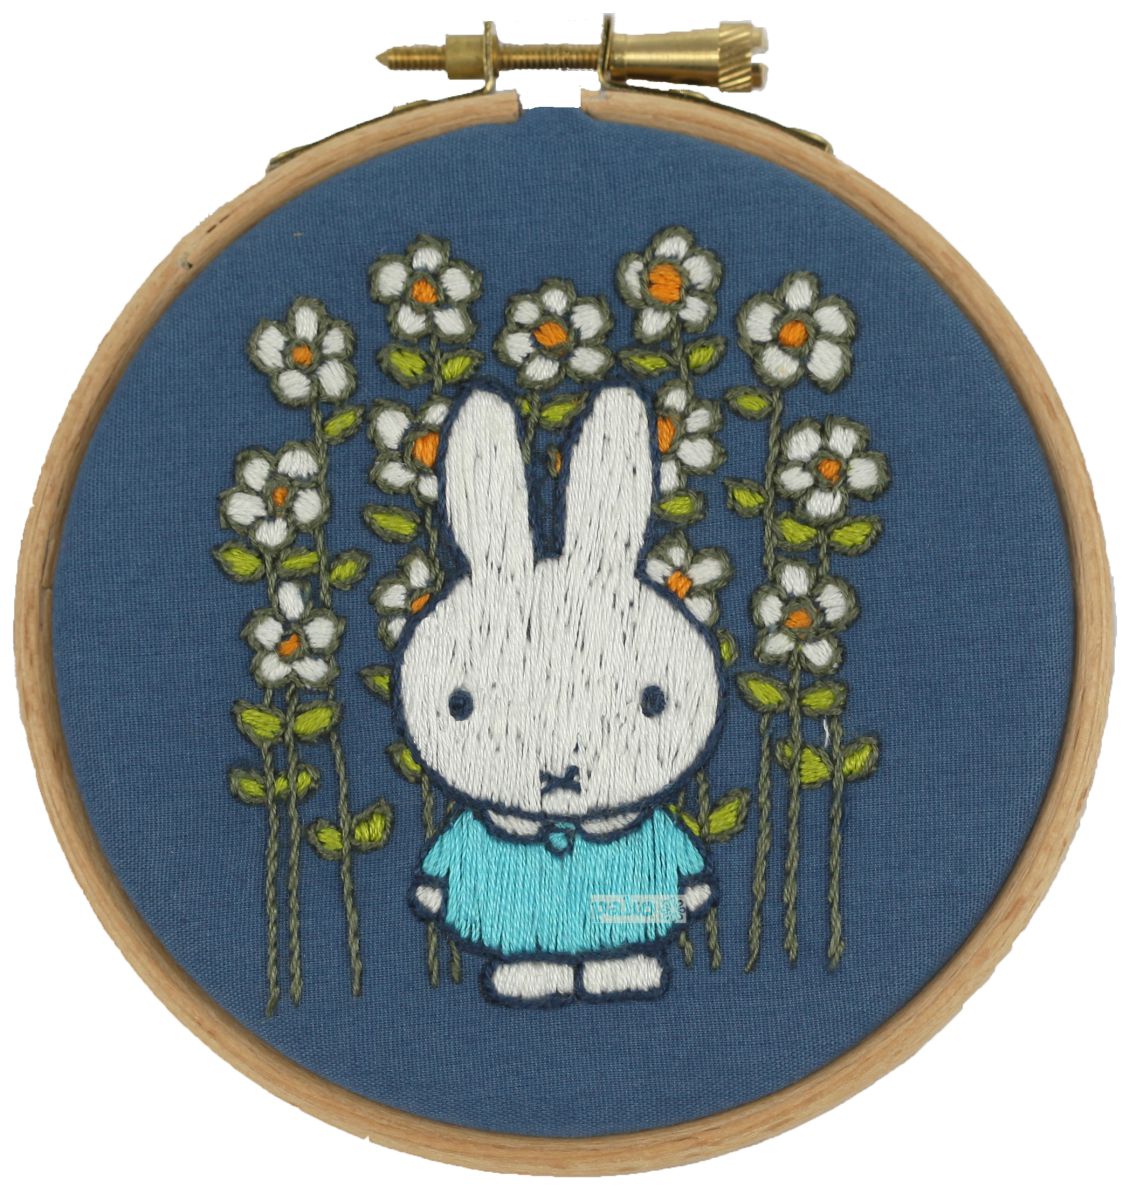 printed embroidery kit miffy in the flower field dick bruna